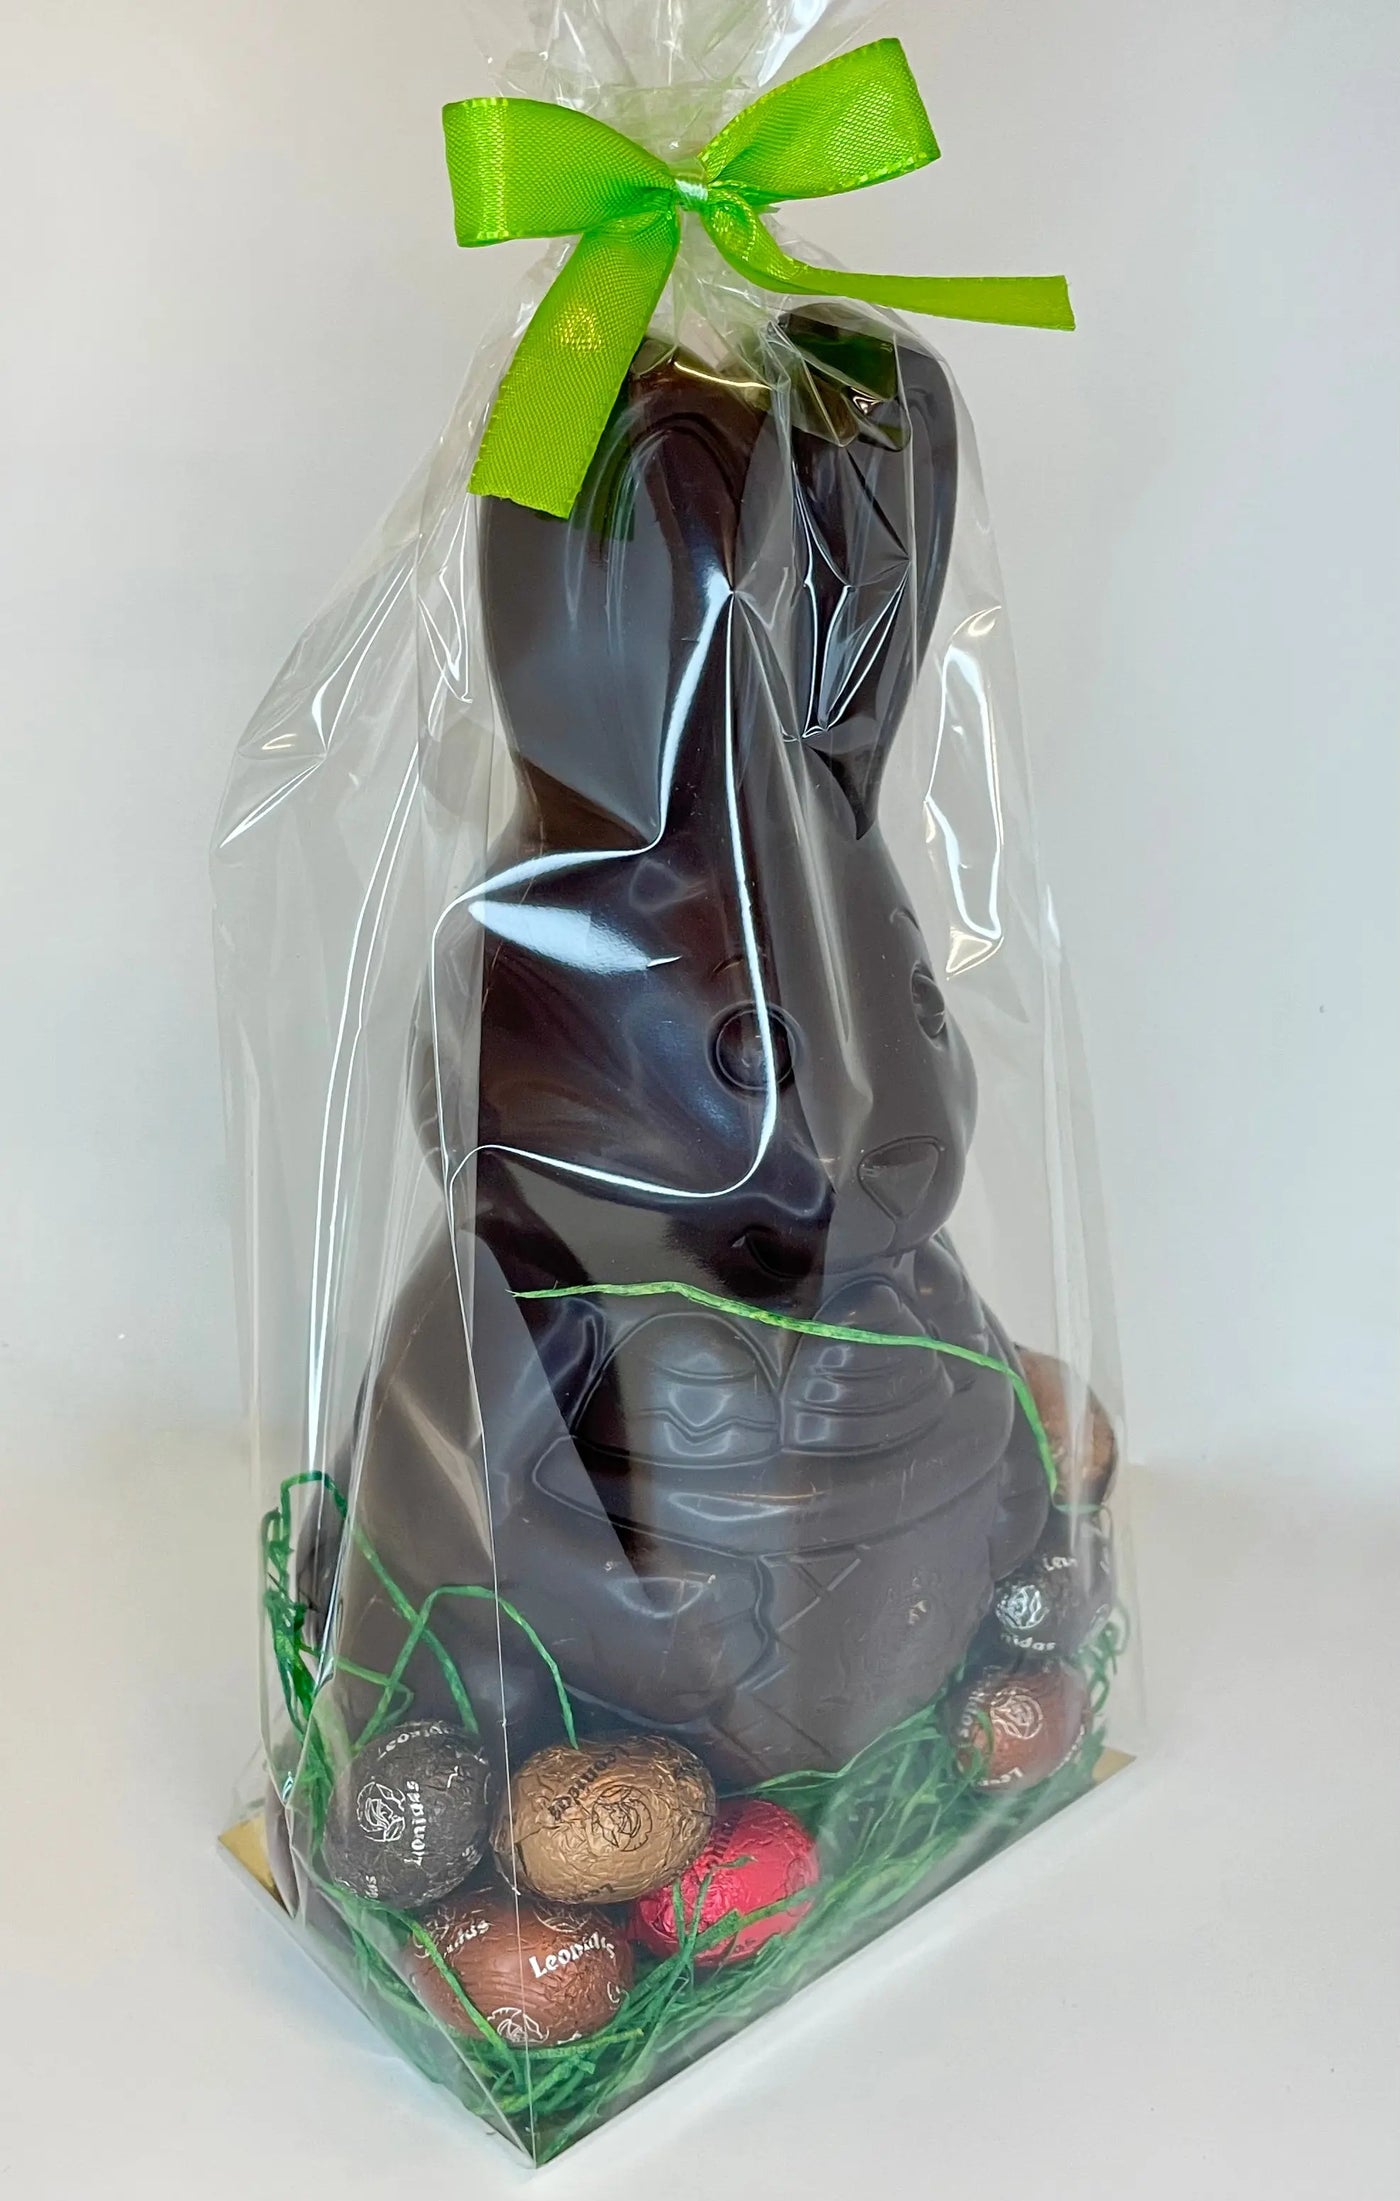 Leonidas Easter Giant Dark Chocolate Hollow Bunny With 08 Mini Eggs, 520g - CLICK & COLLECT ONLY Leonidas Kensington